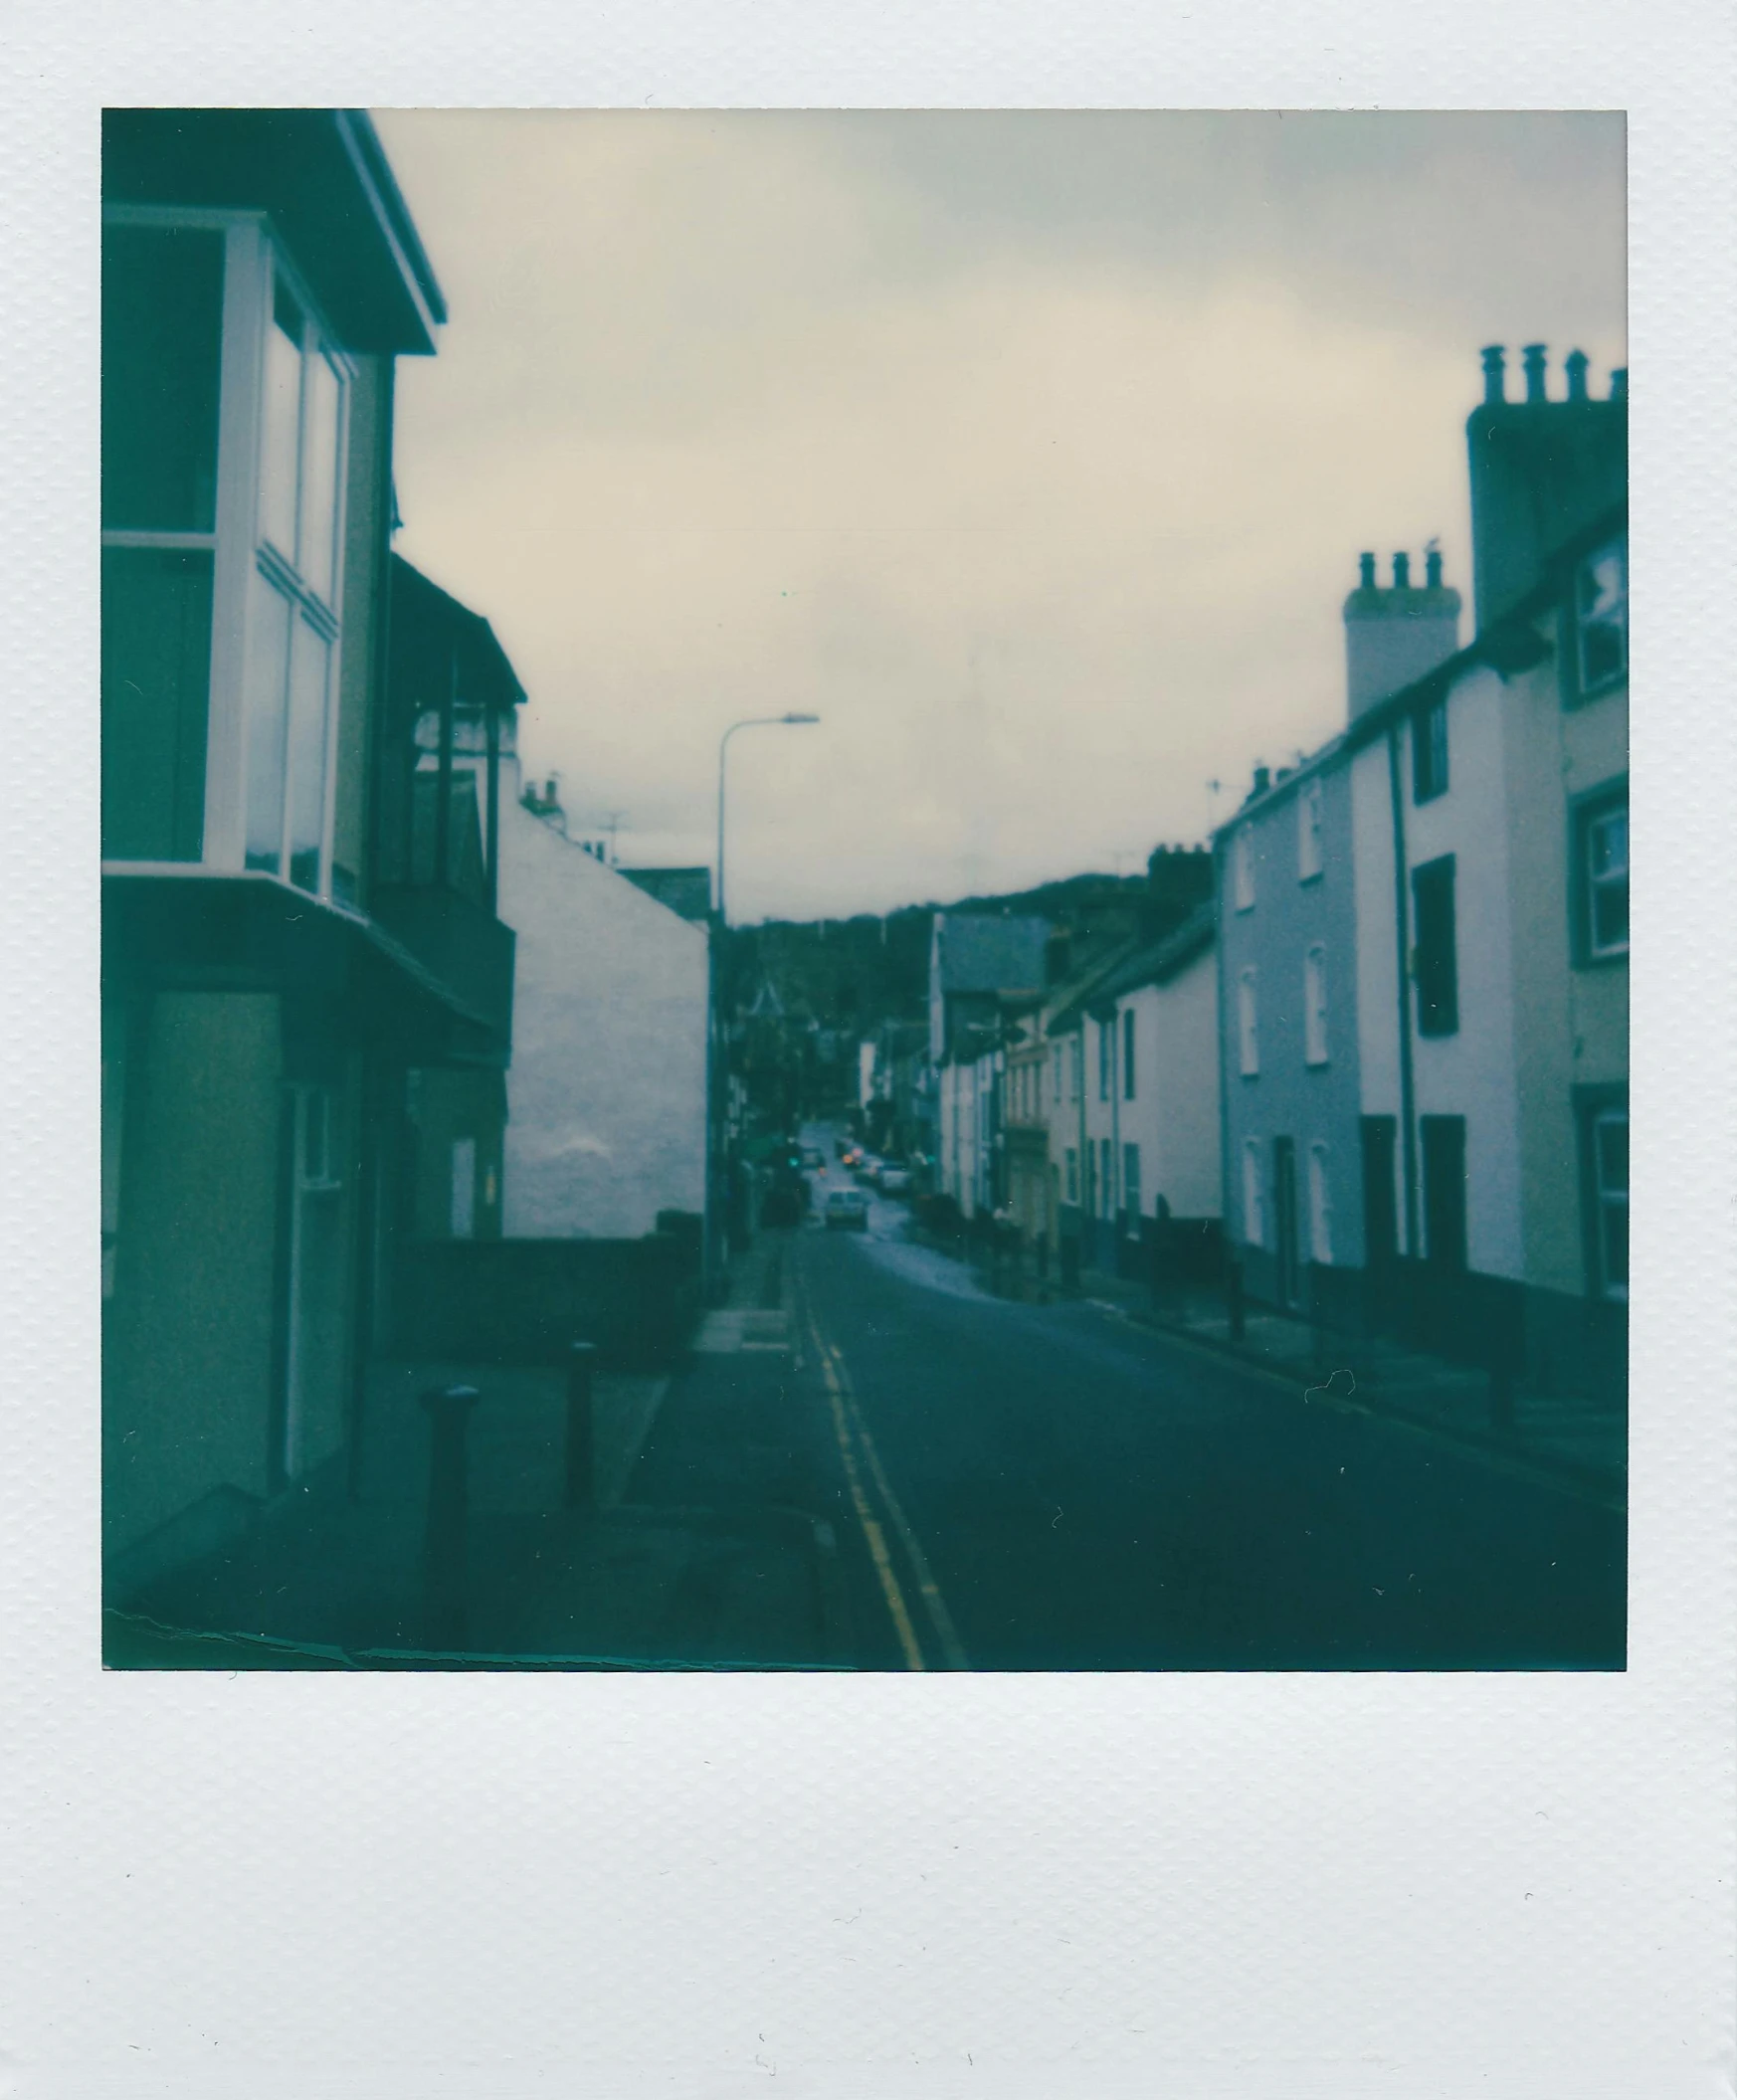 a picture of a street in a small town, a polaroid photo, by IAN SPRIGGS, unsplash, postminimalism, wales, multiple stories, medium format, slight overcast